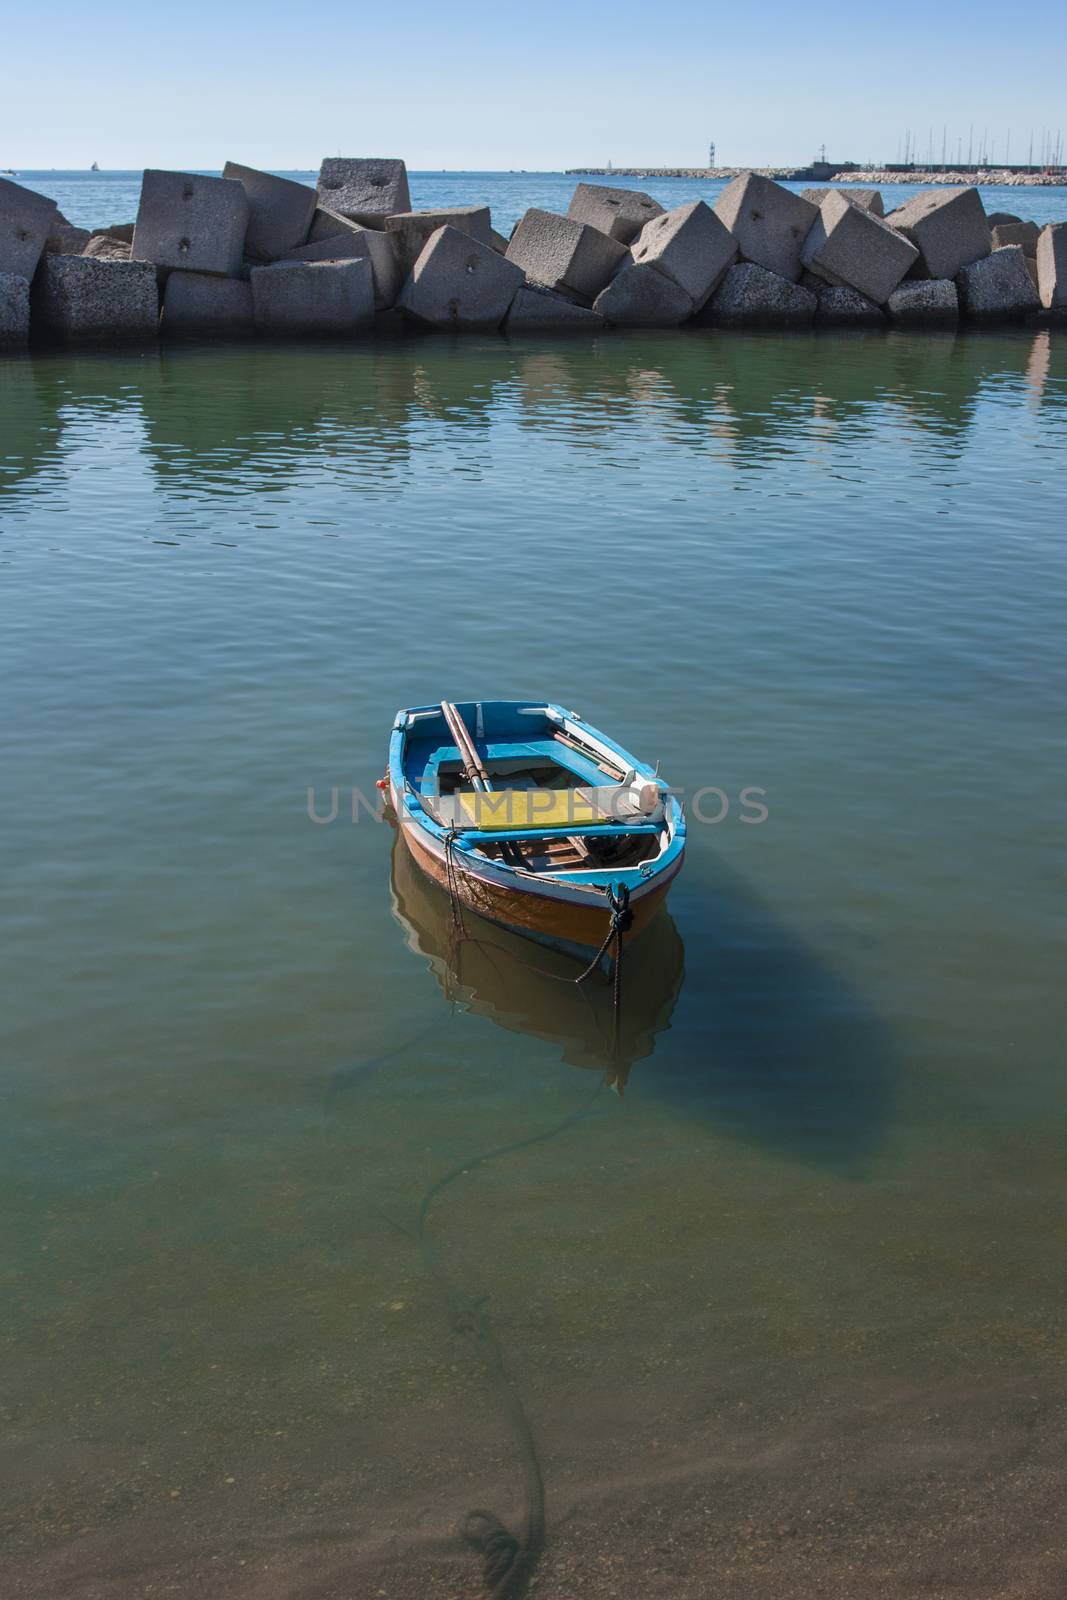 Boat moored in the port of Salerno in a sea green waters. Salerno destination for tourism and culture